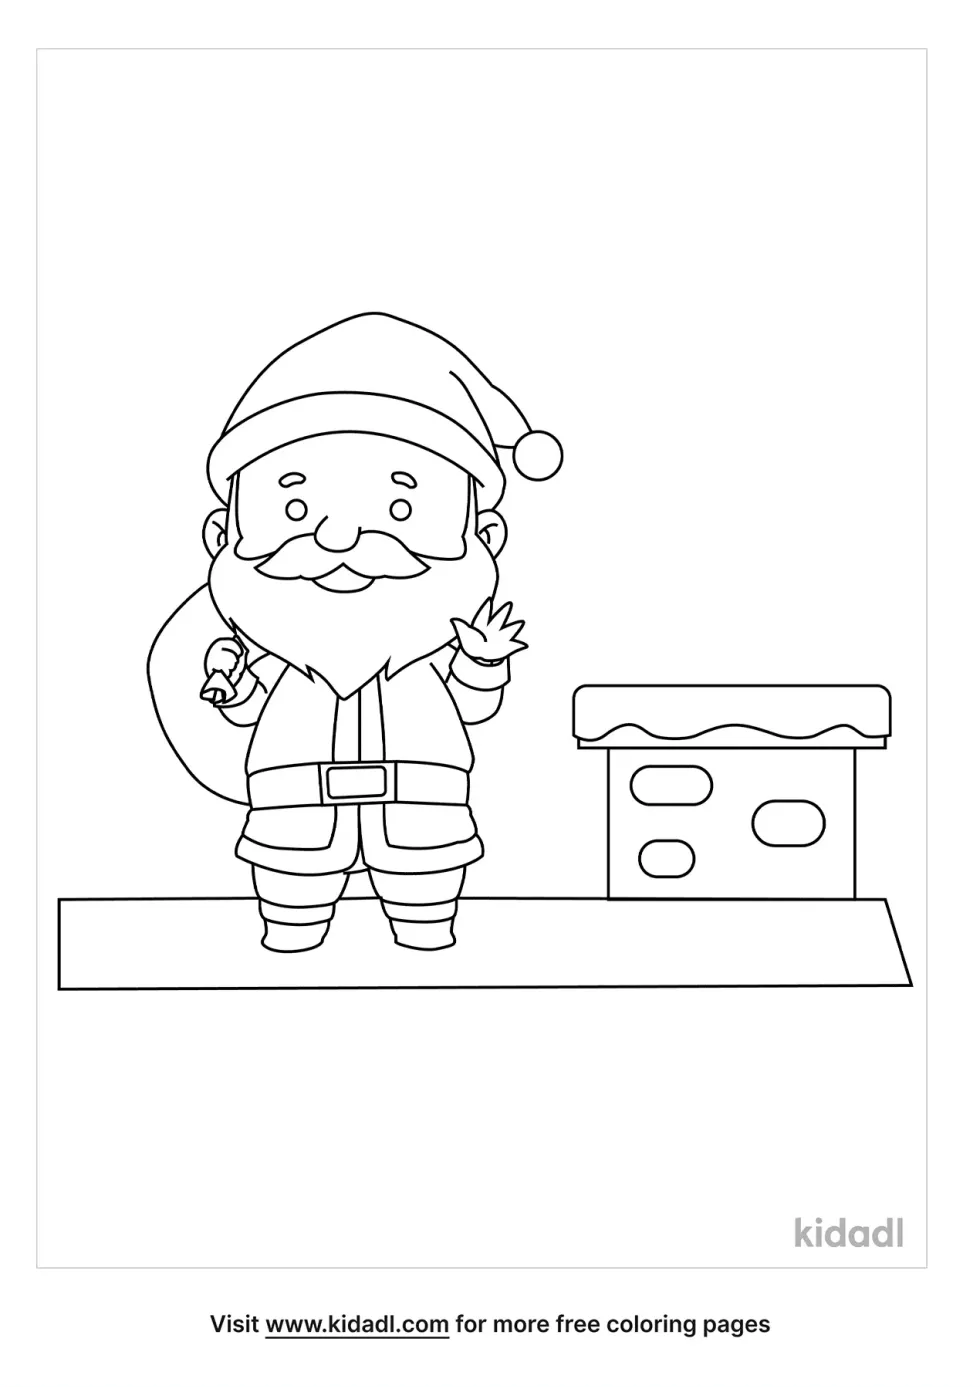 Santa On Rooftop Coloring Page